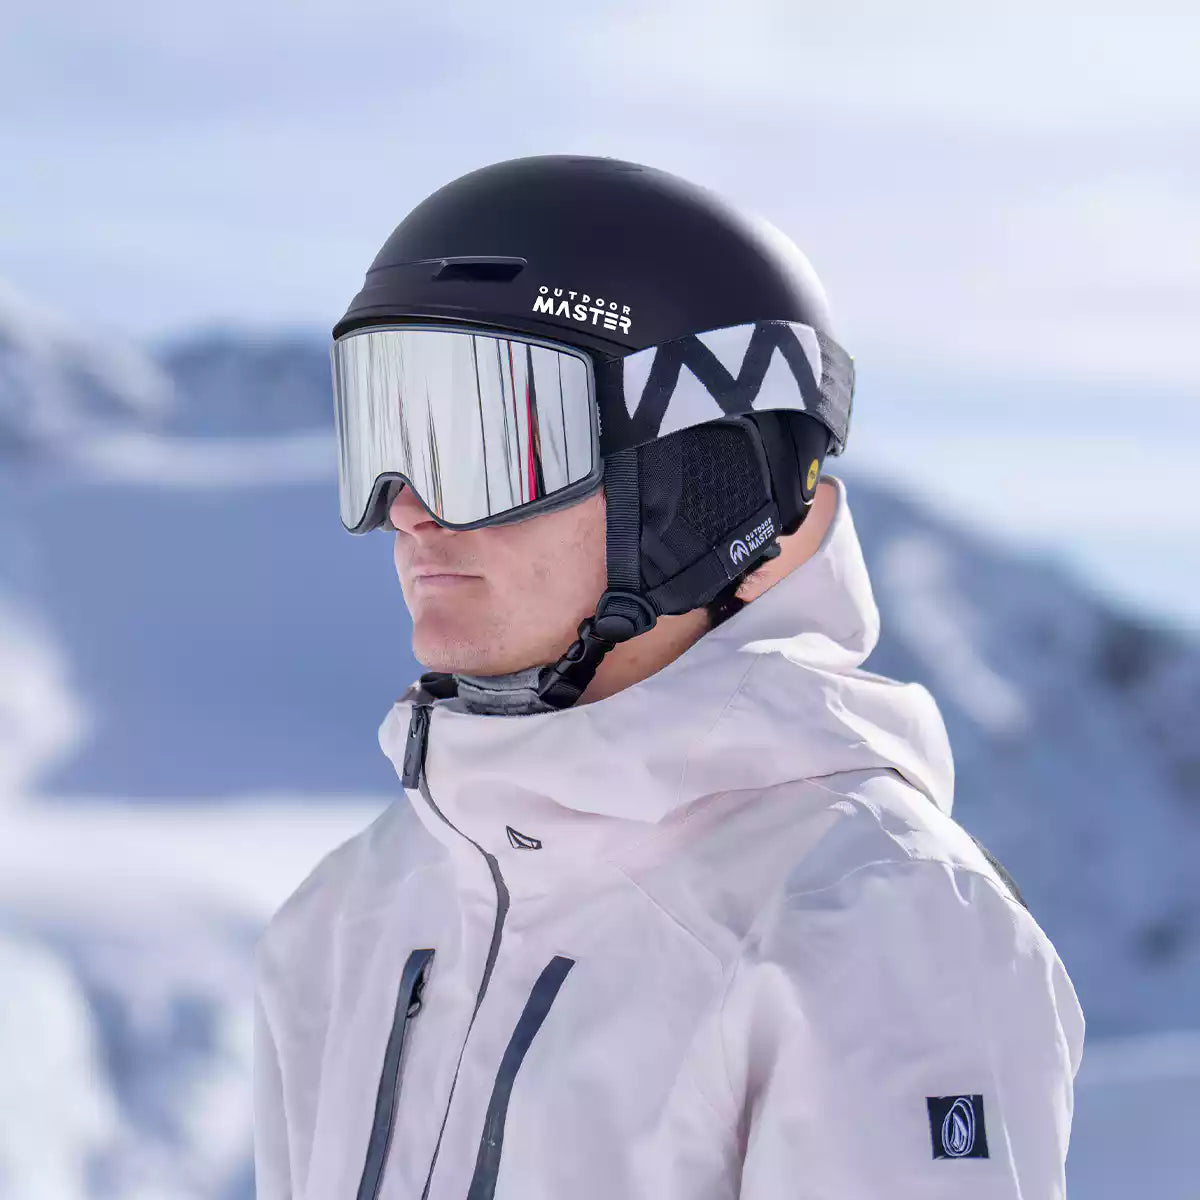 Ski Helmet Speakers, True Wireless Bluetooth Drop-in HD Headphones with  Easy Control Buttons and Built-in Mic for Skiing, Snowboarding  Motorcycling, Climbing, Compatible Any Audio Ready Helmet 